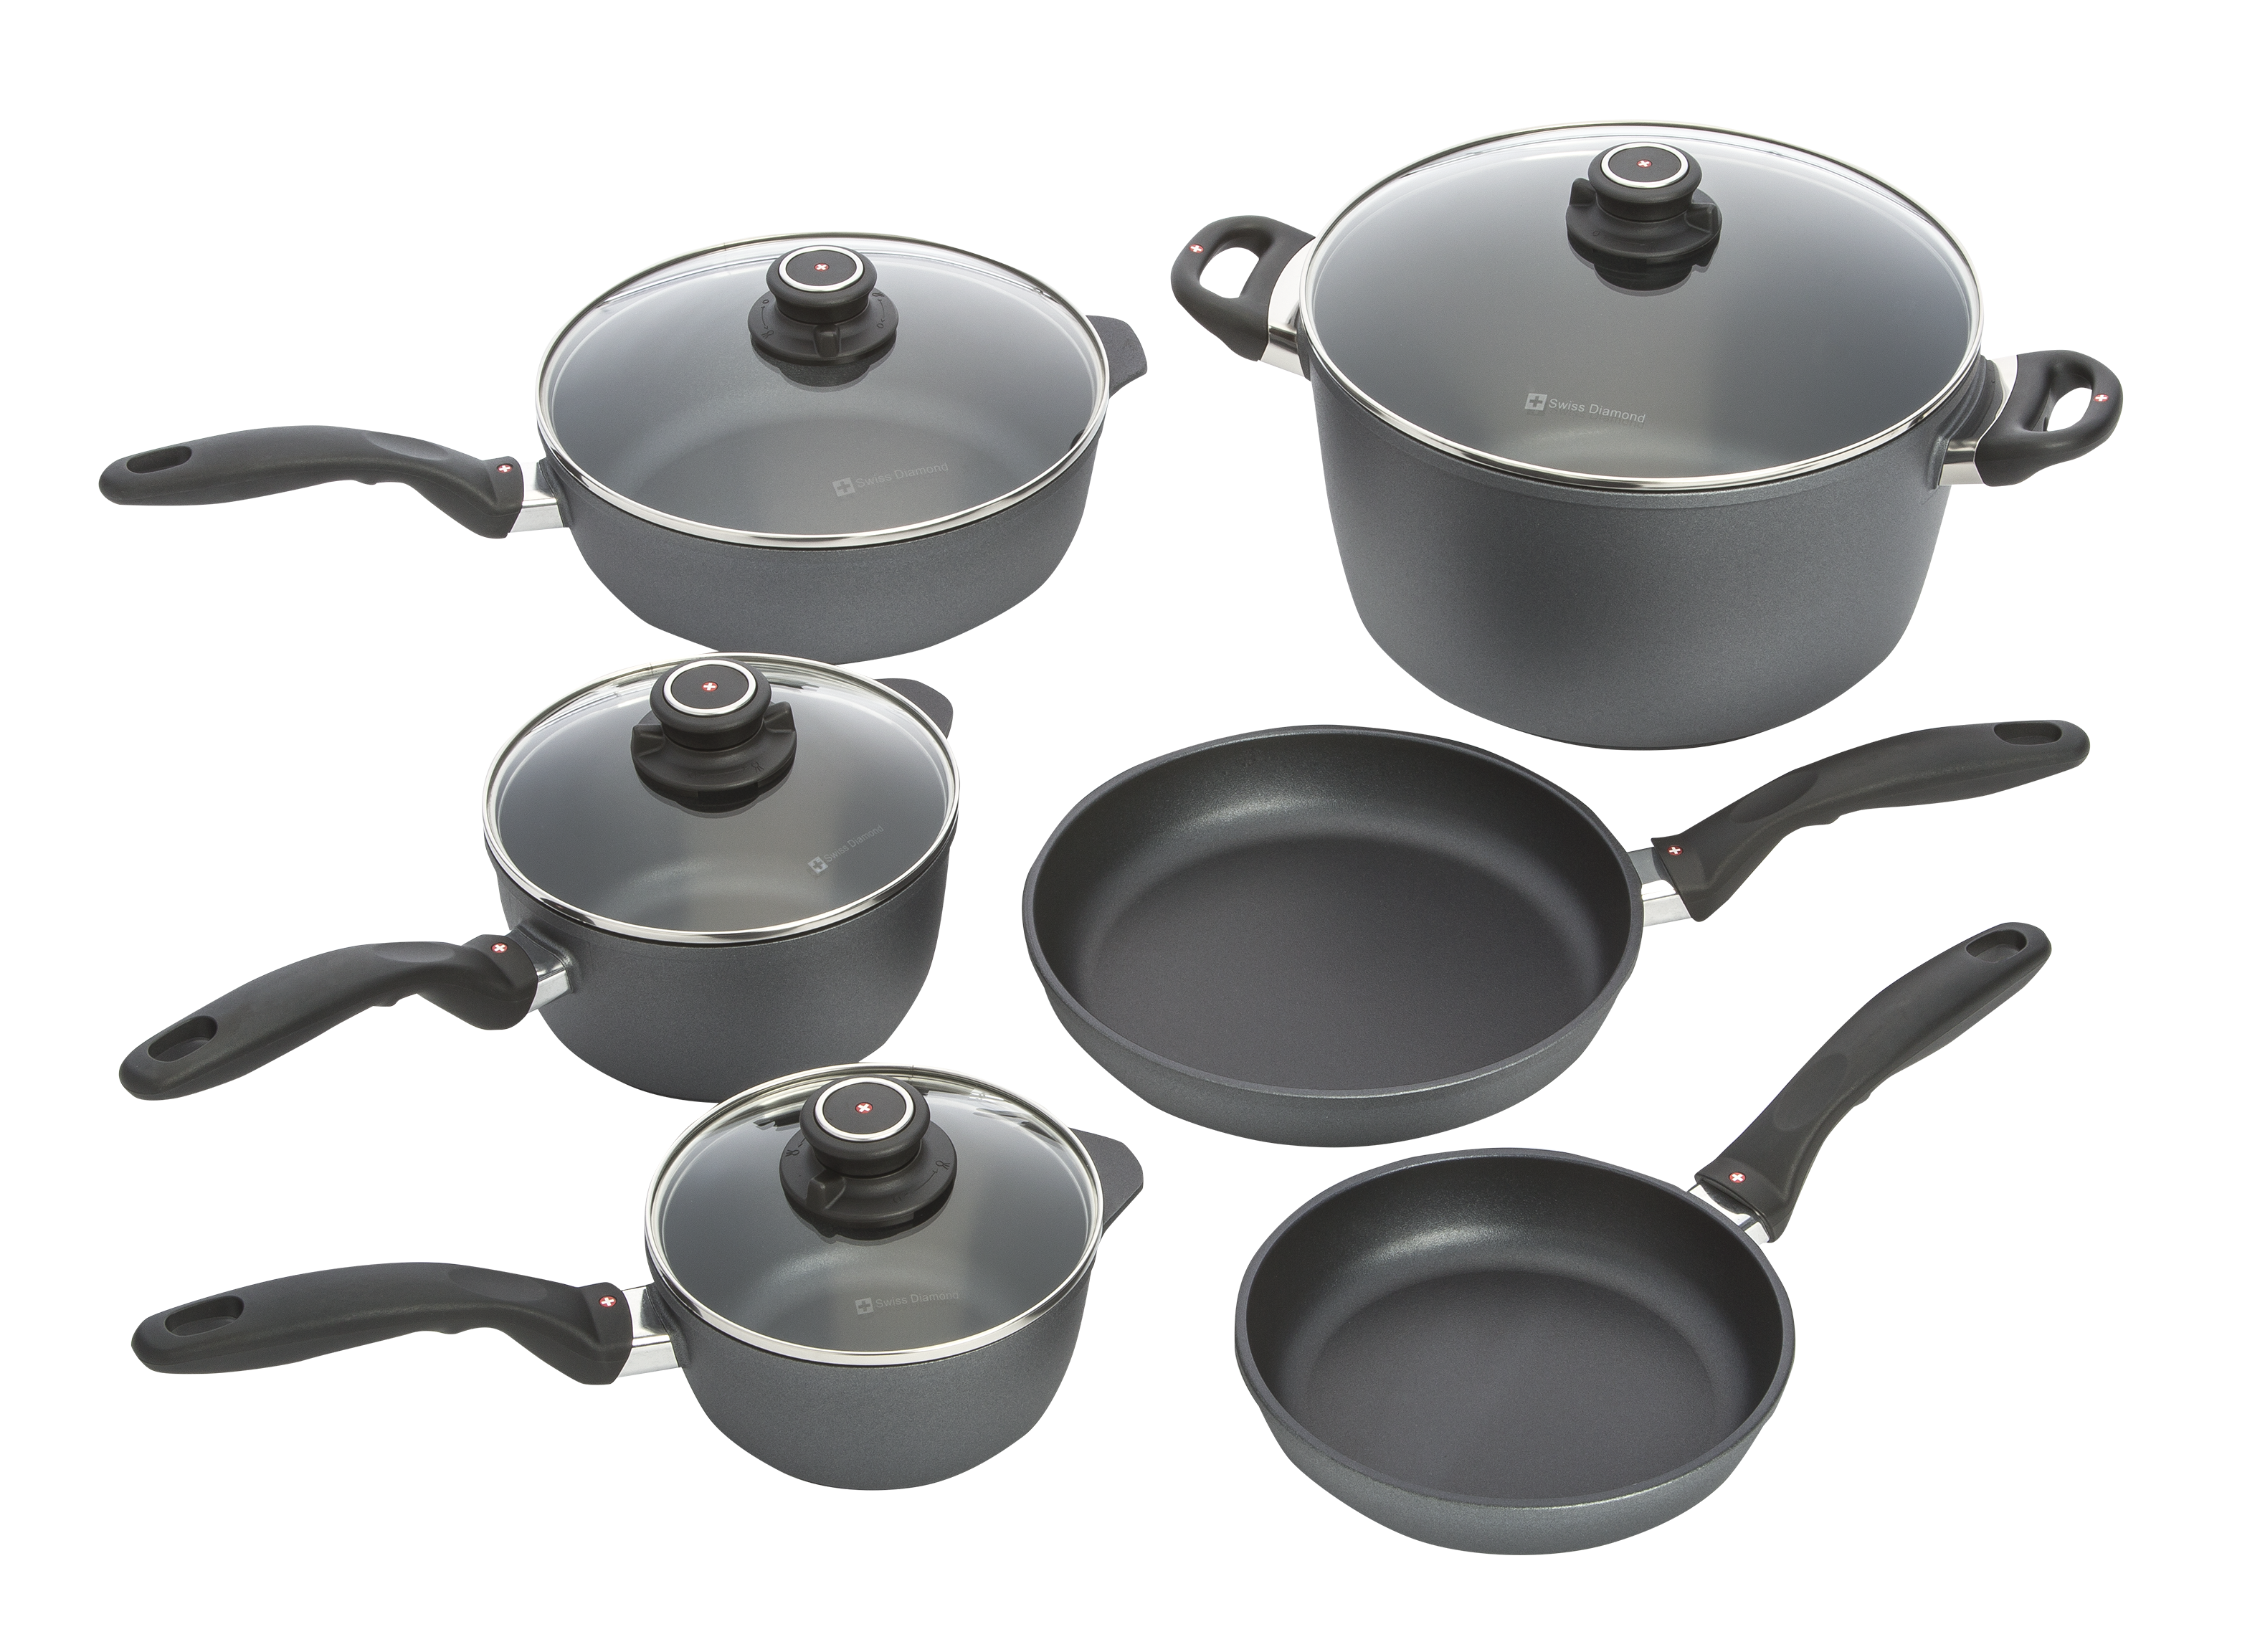 https://crdms.images.consumerreports.org/prod/products/cr/models/8393-cookware-swissdiamond-reinforced10pc6010.png